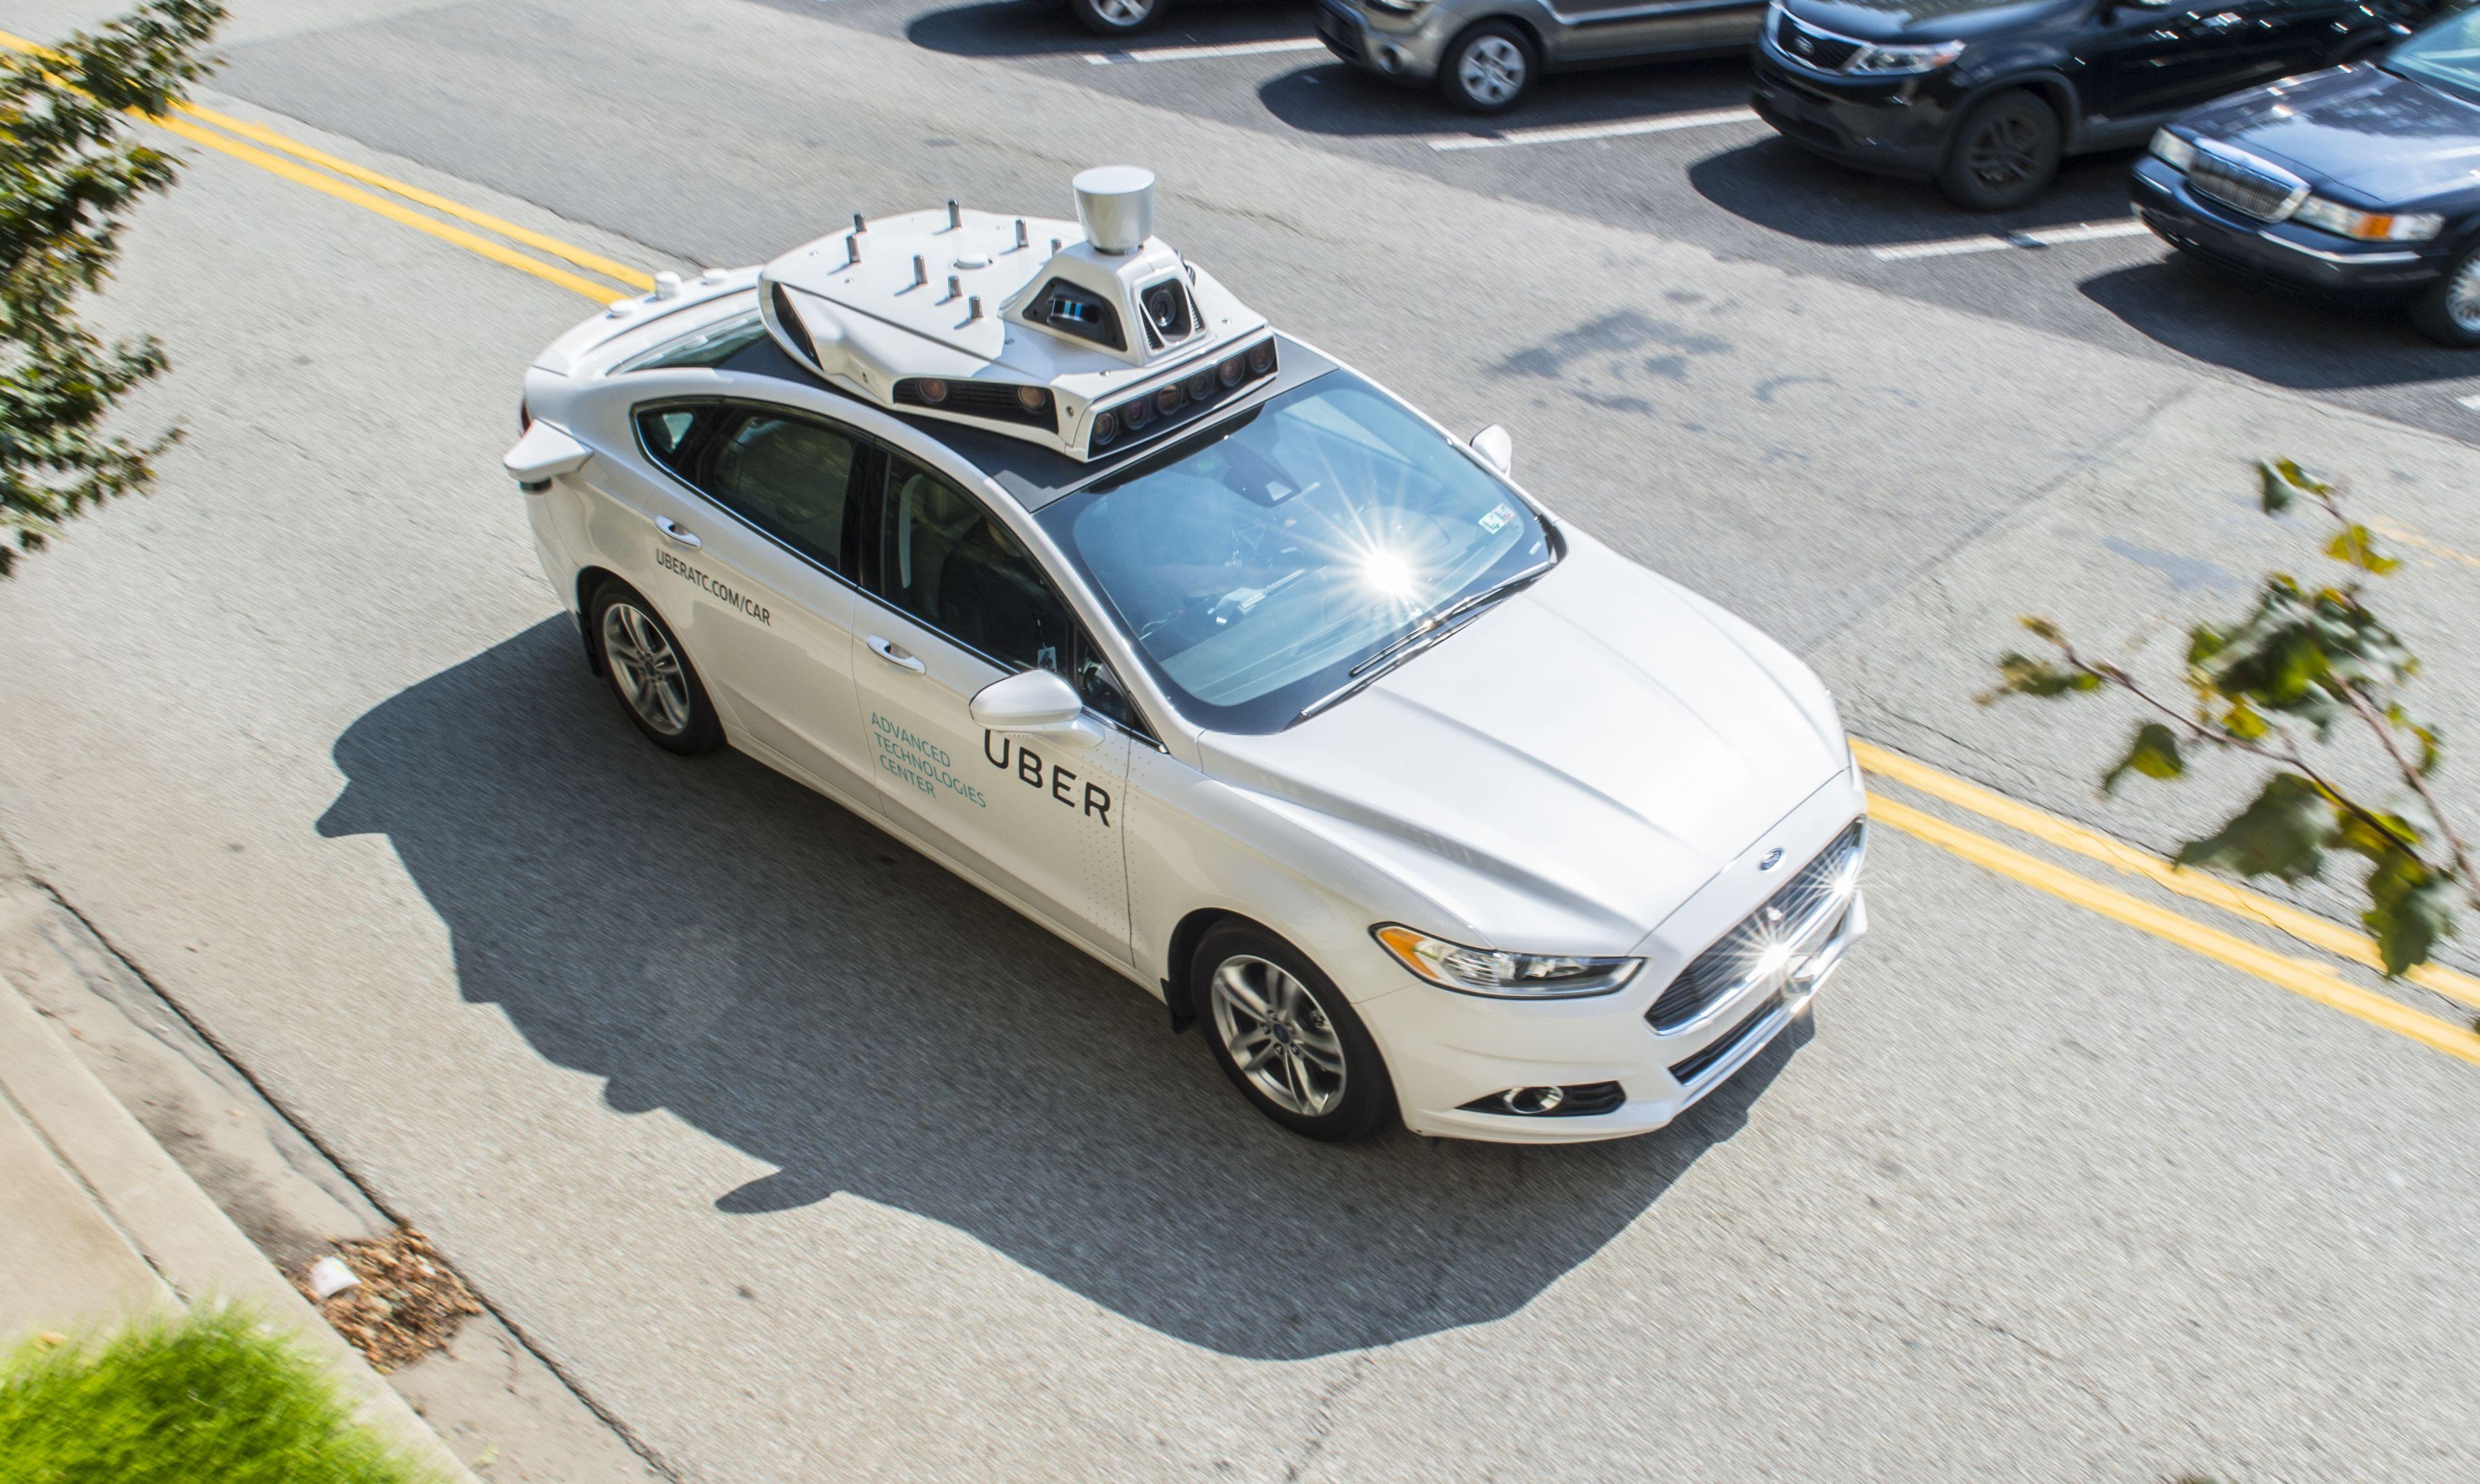 Actual Size Uber Driving Logo - As Uber's robot cars hit the streets in Pittsburgh, the fears of its ...